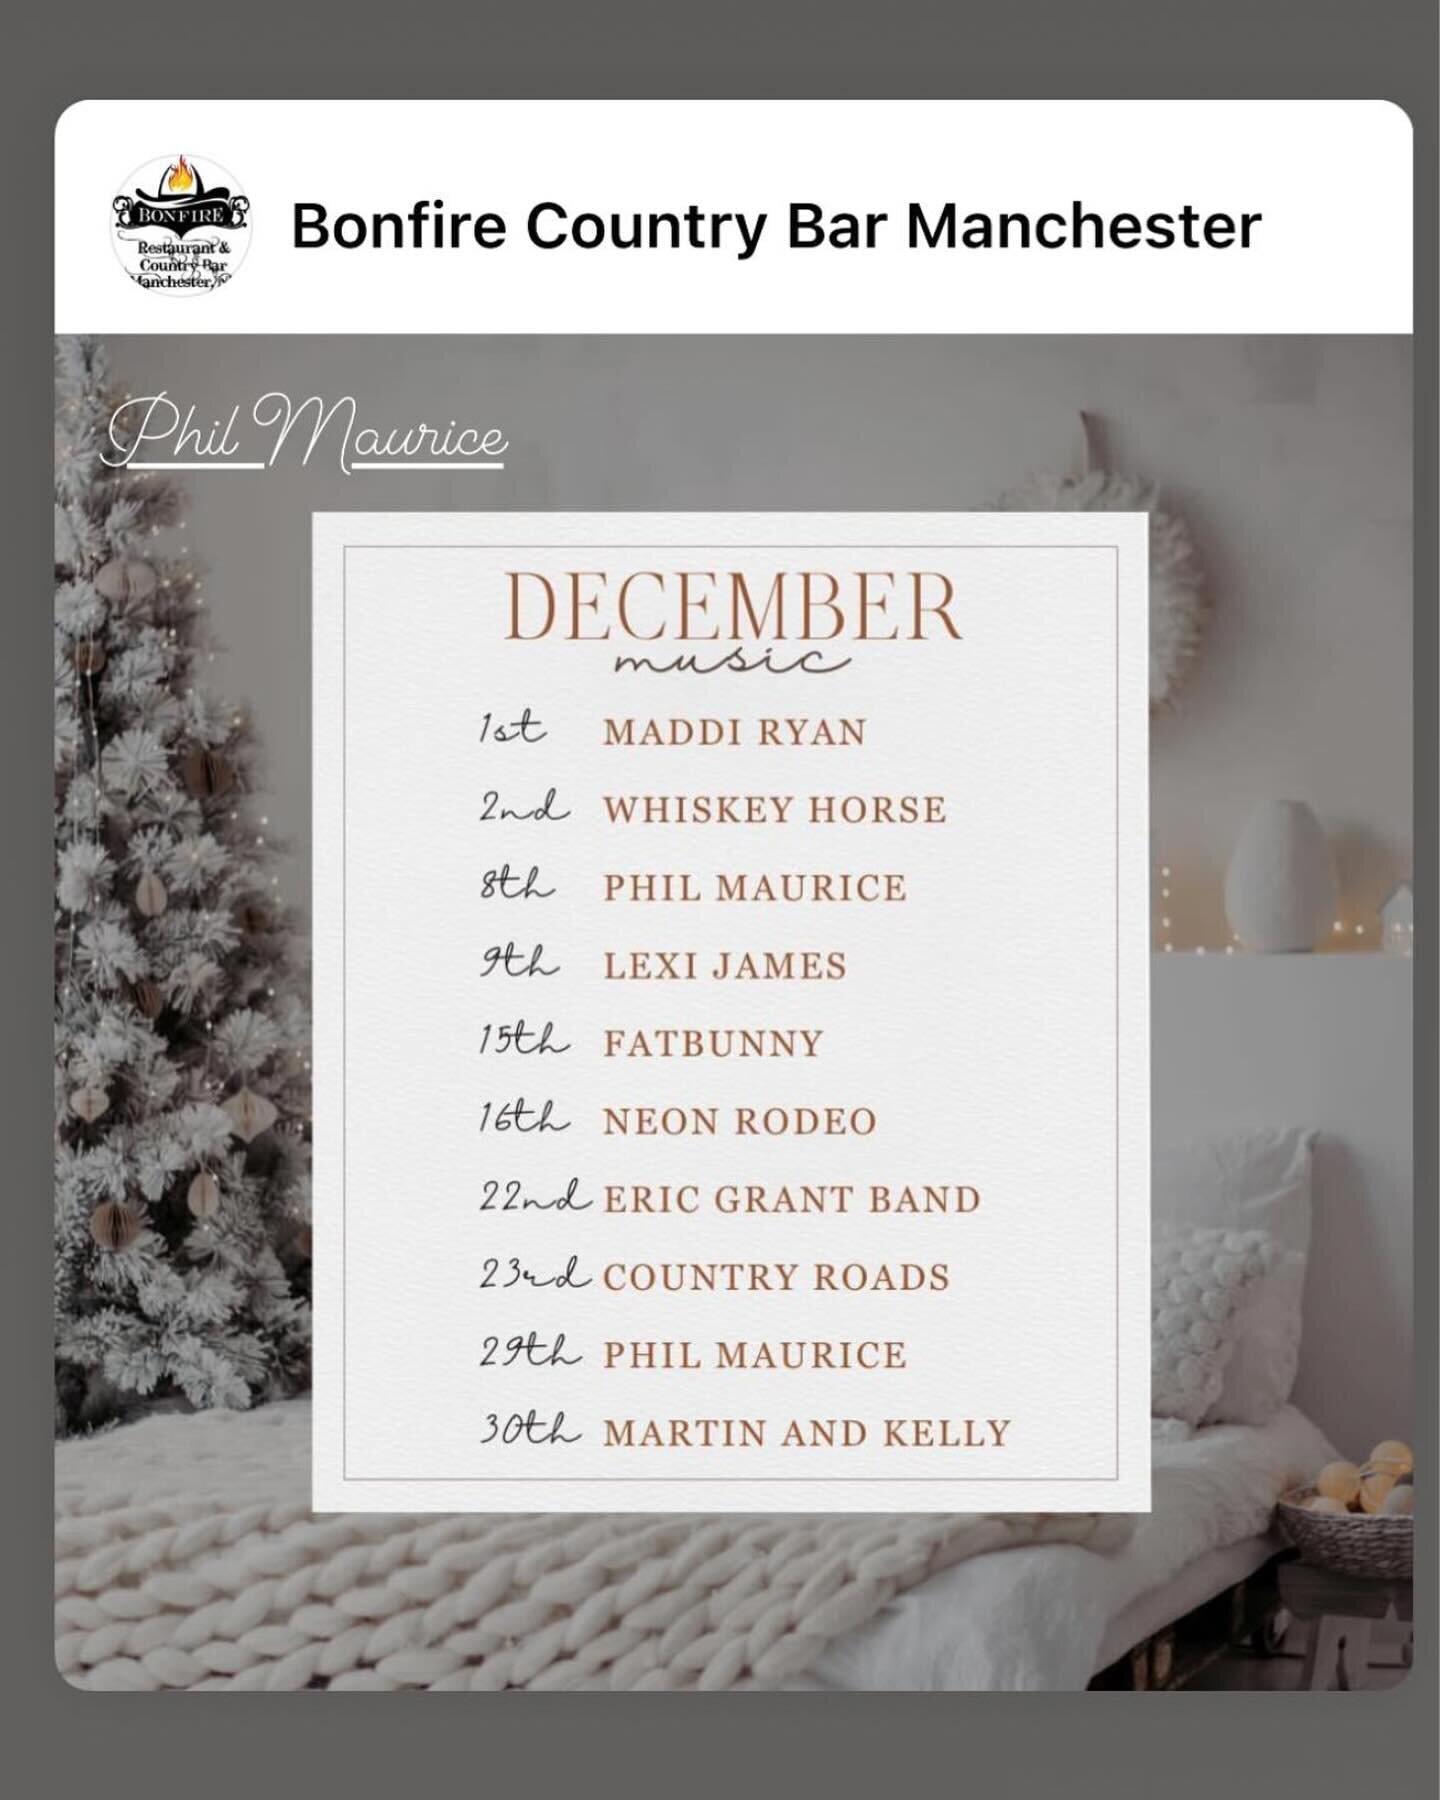 December 15 @bonfiremanchester, we&rsquo;ll be strumming a little holiday cheer!  Love FB.